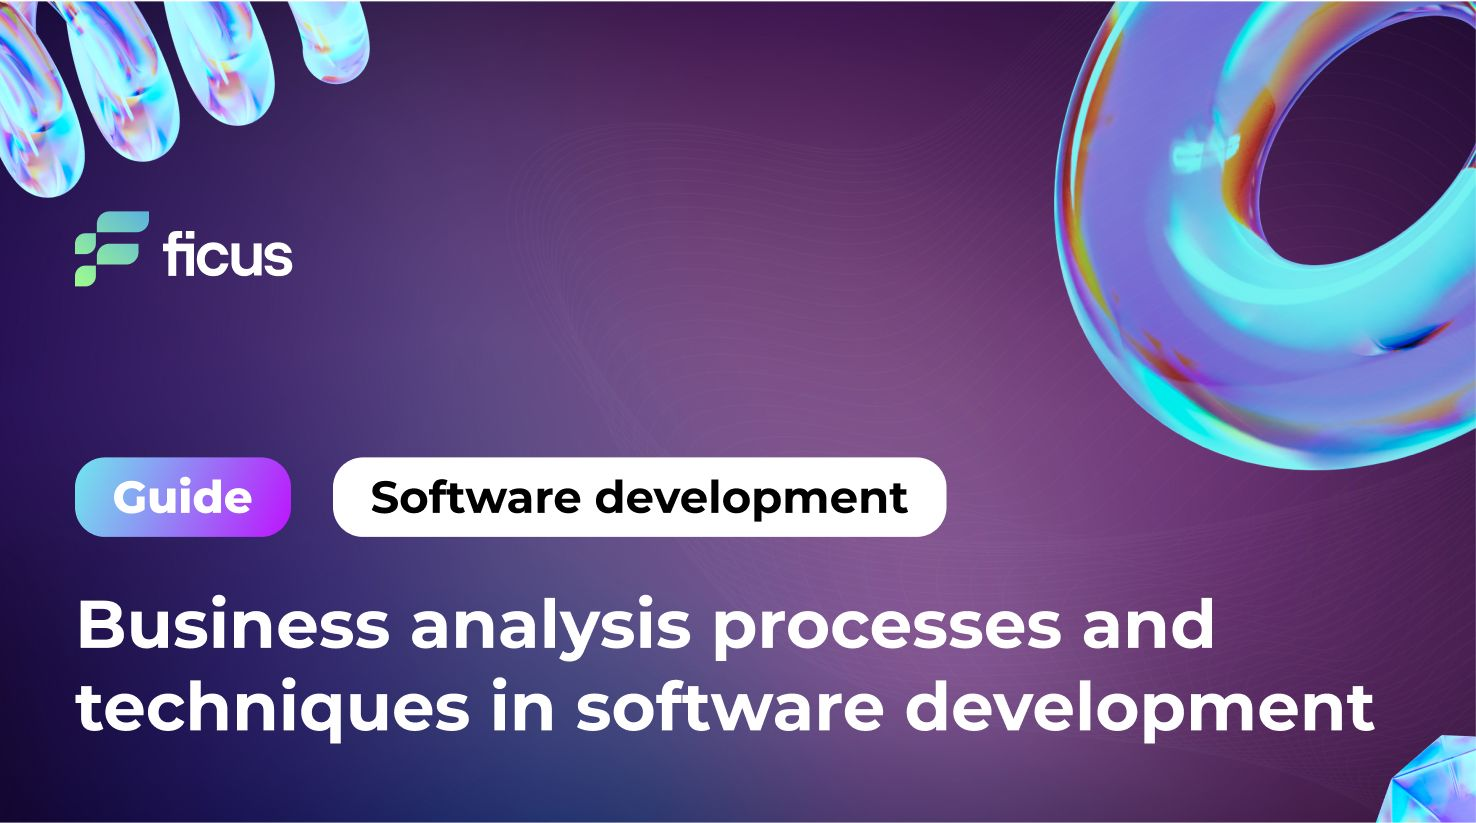 Business analysis processes and techniques in software development